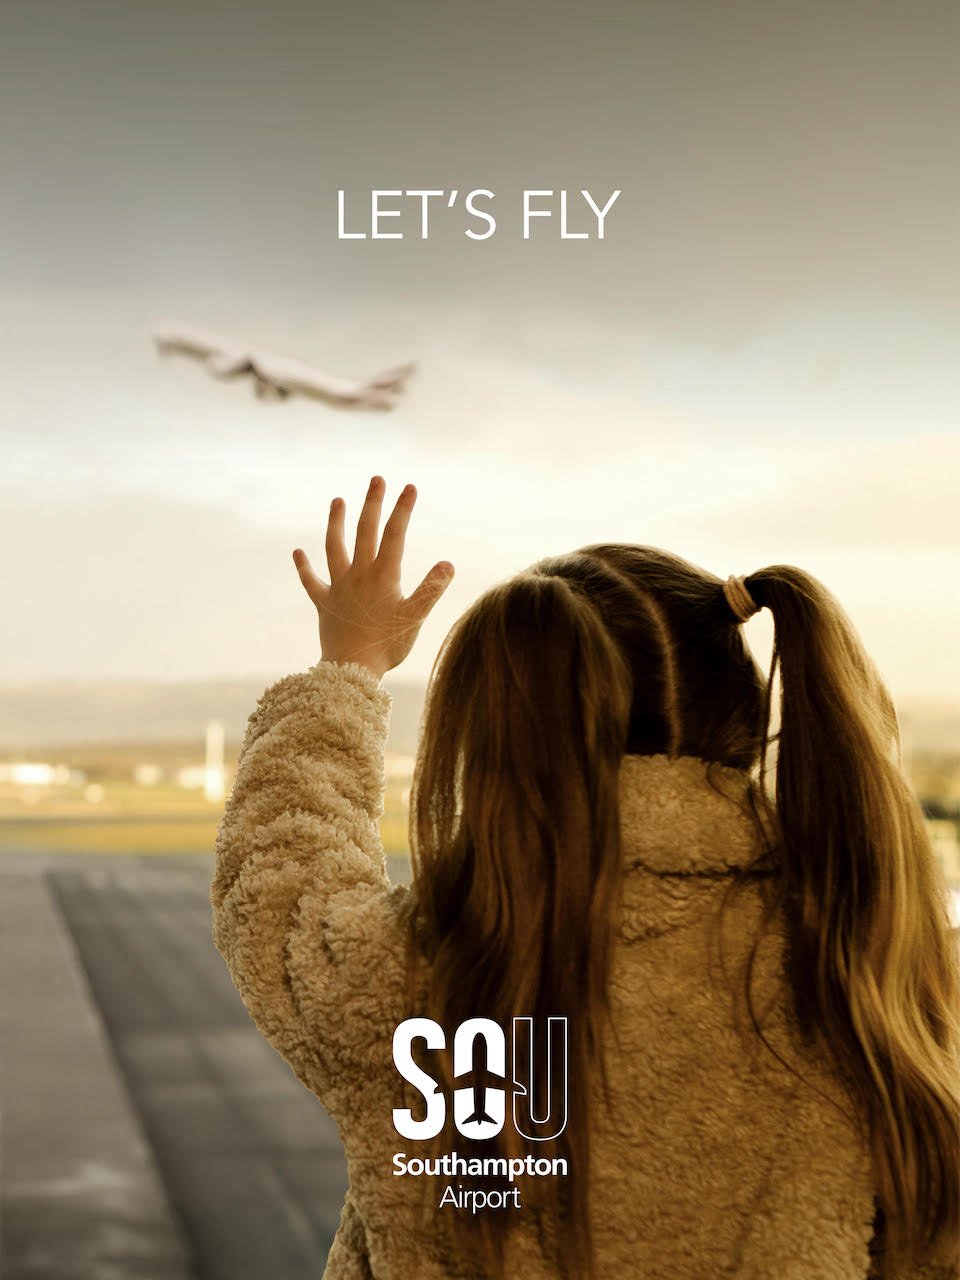 matt marcus glasgow airport lets fly advertising campaign 2.jpg